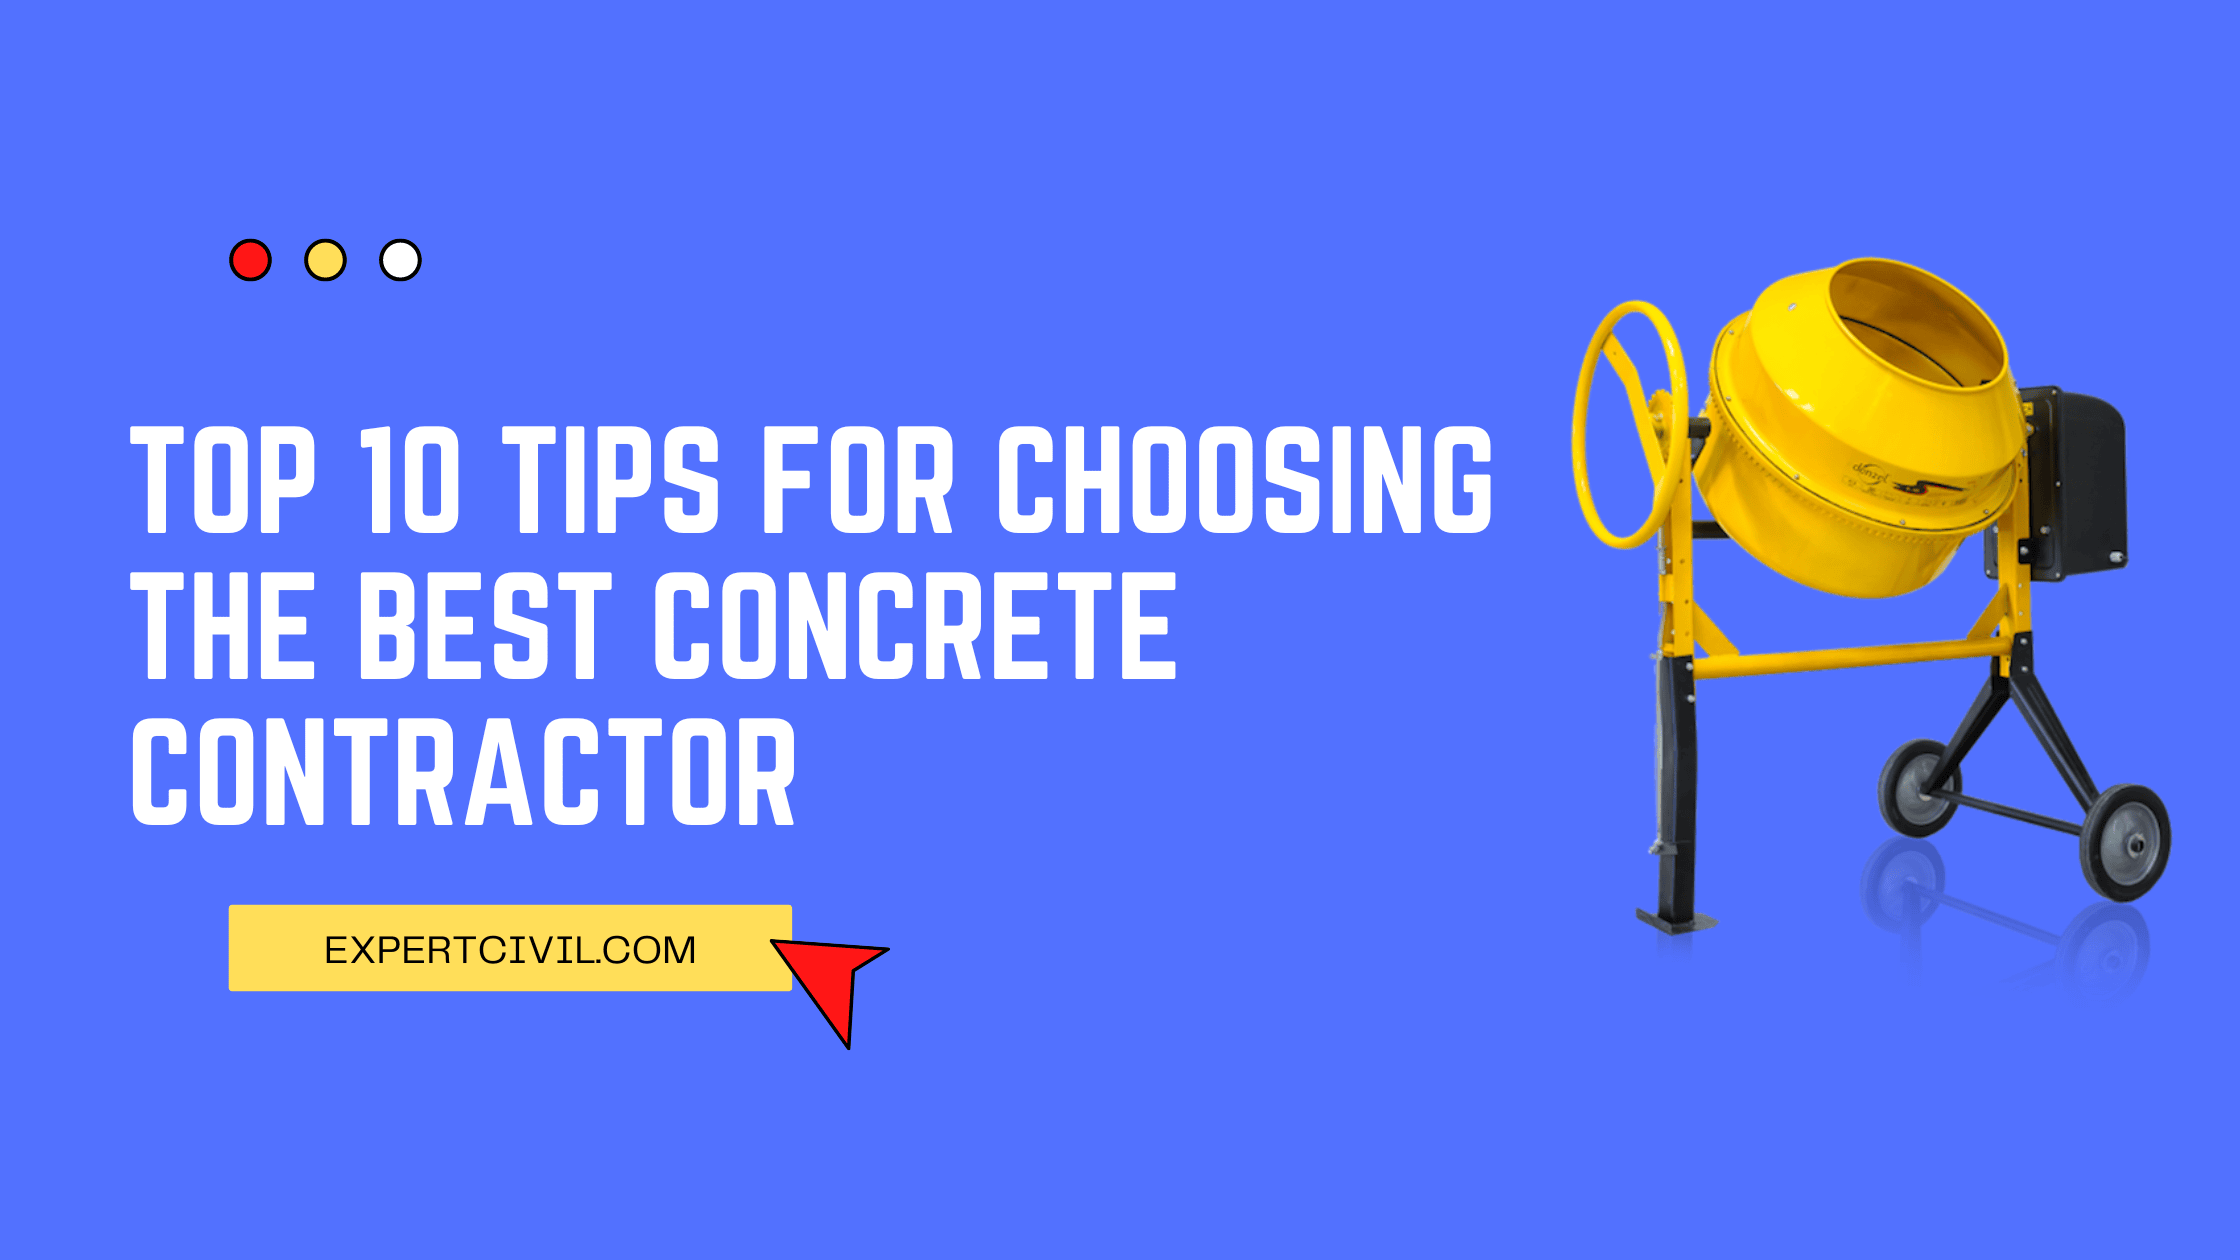 Top 10 Tips for Choosing the Best Concrete Contractor